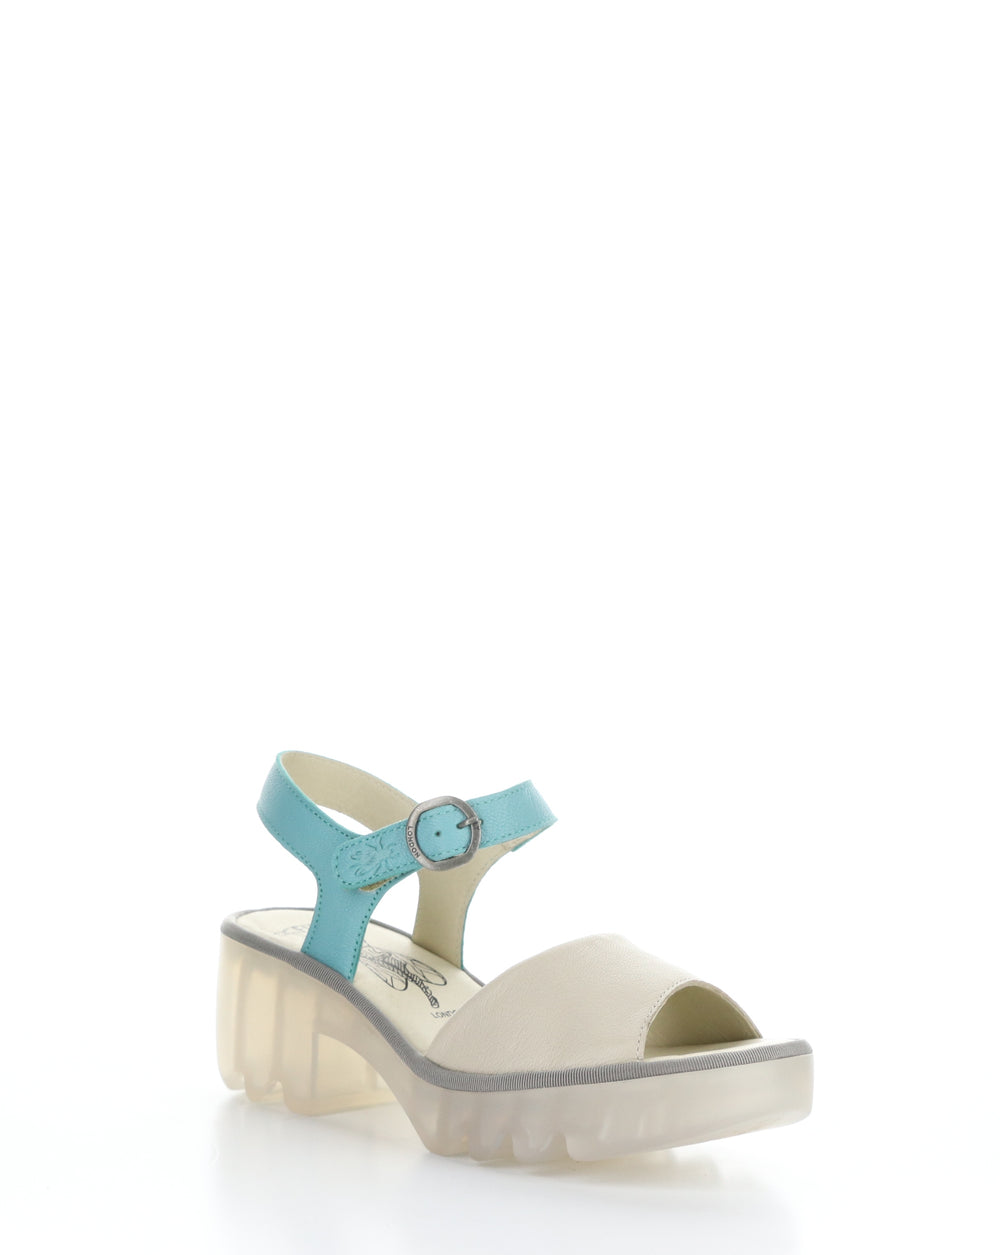 TULL503FLY 003 CLOUD/TURQUOISE Velcro Sandals